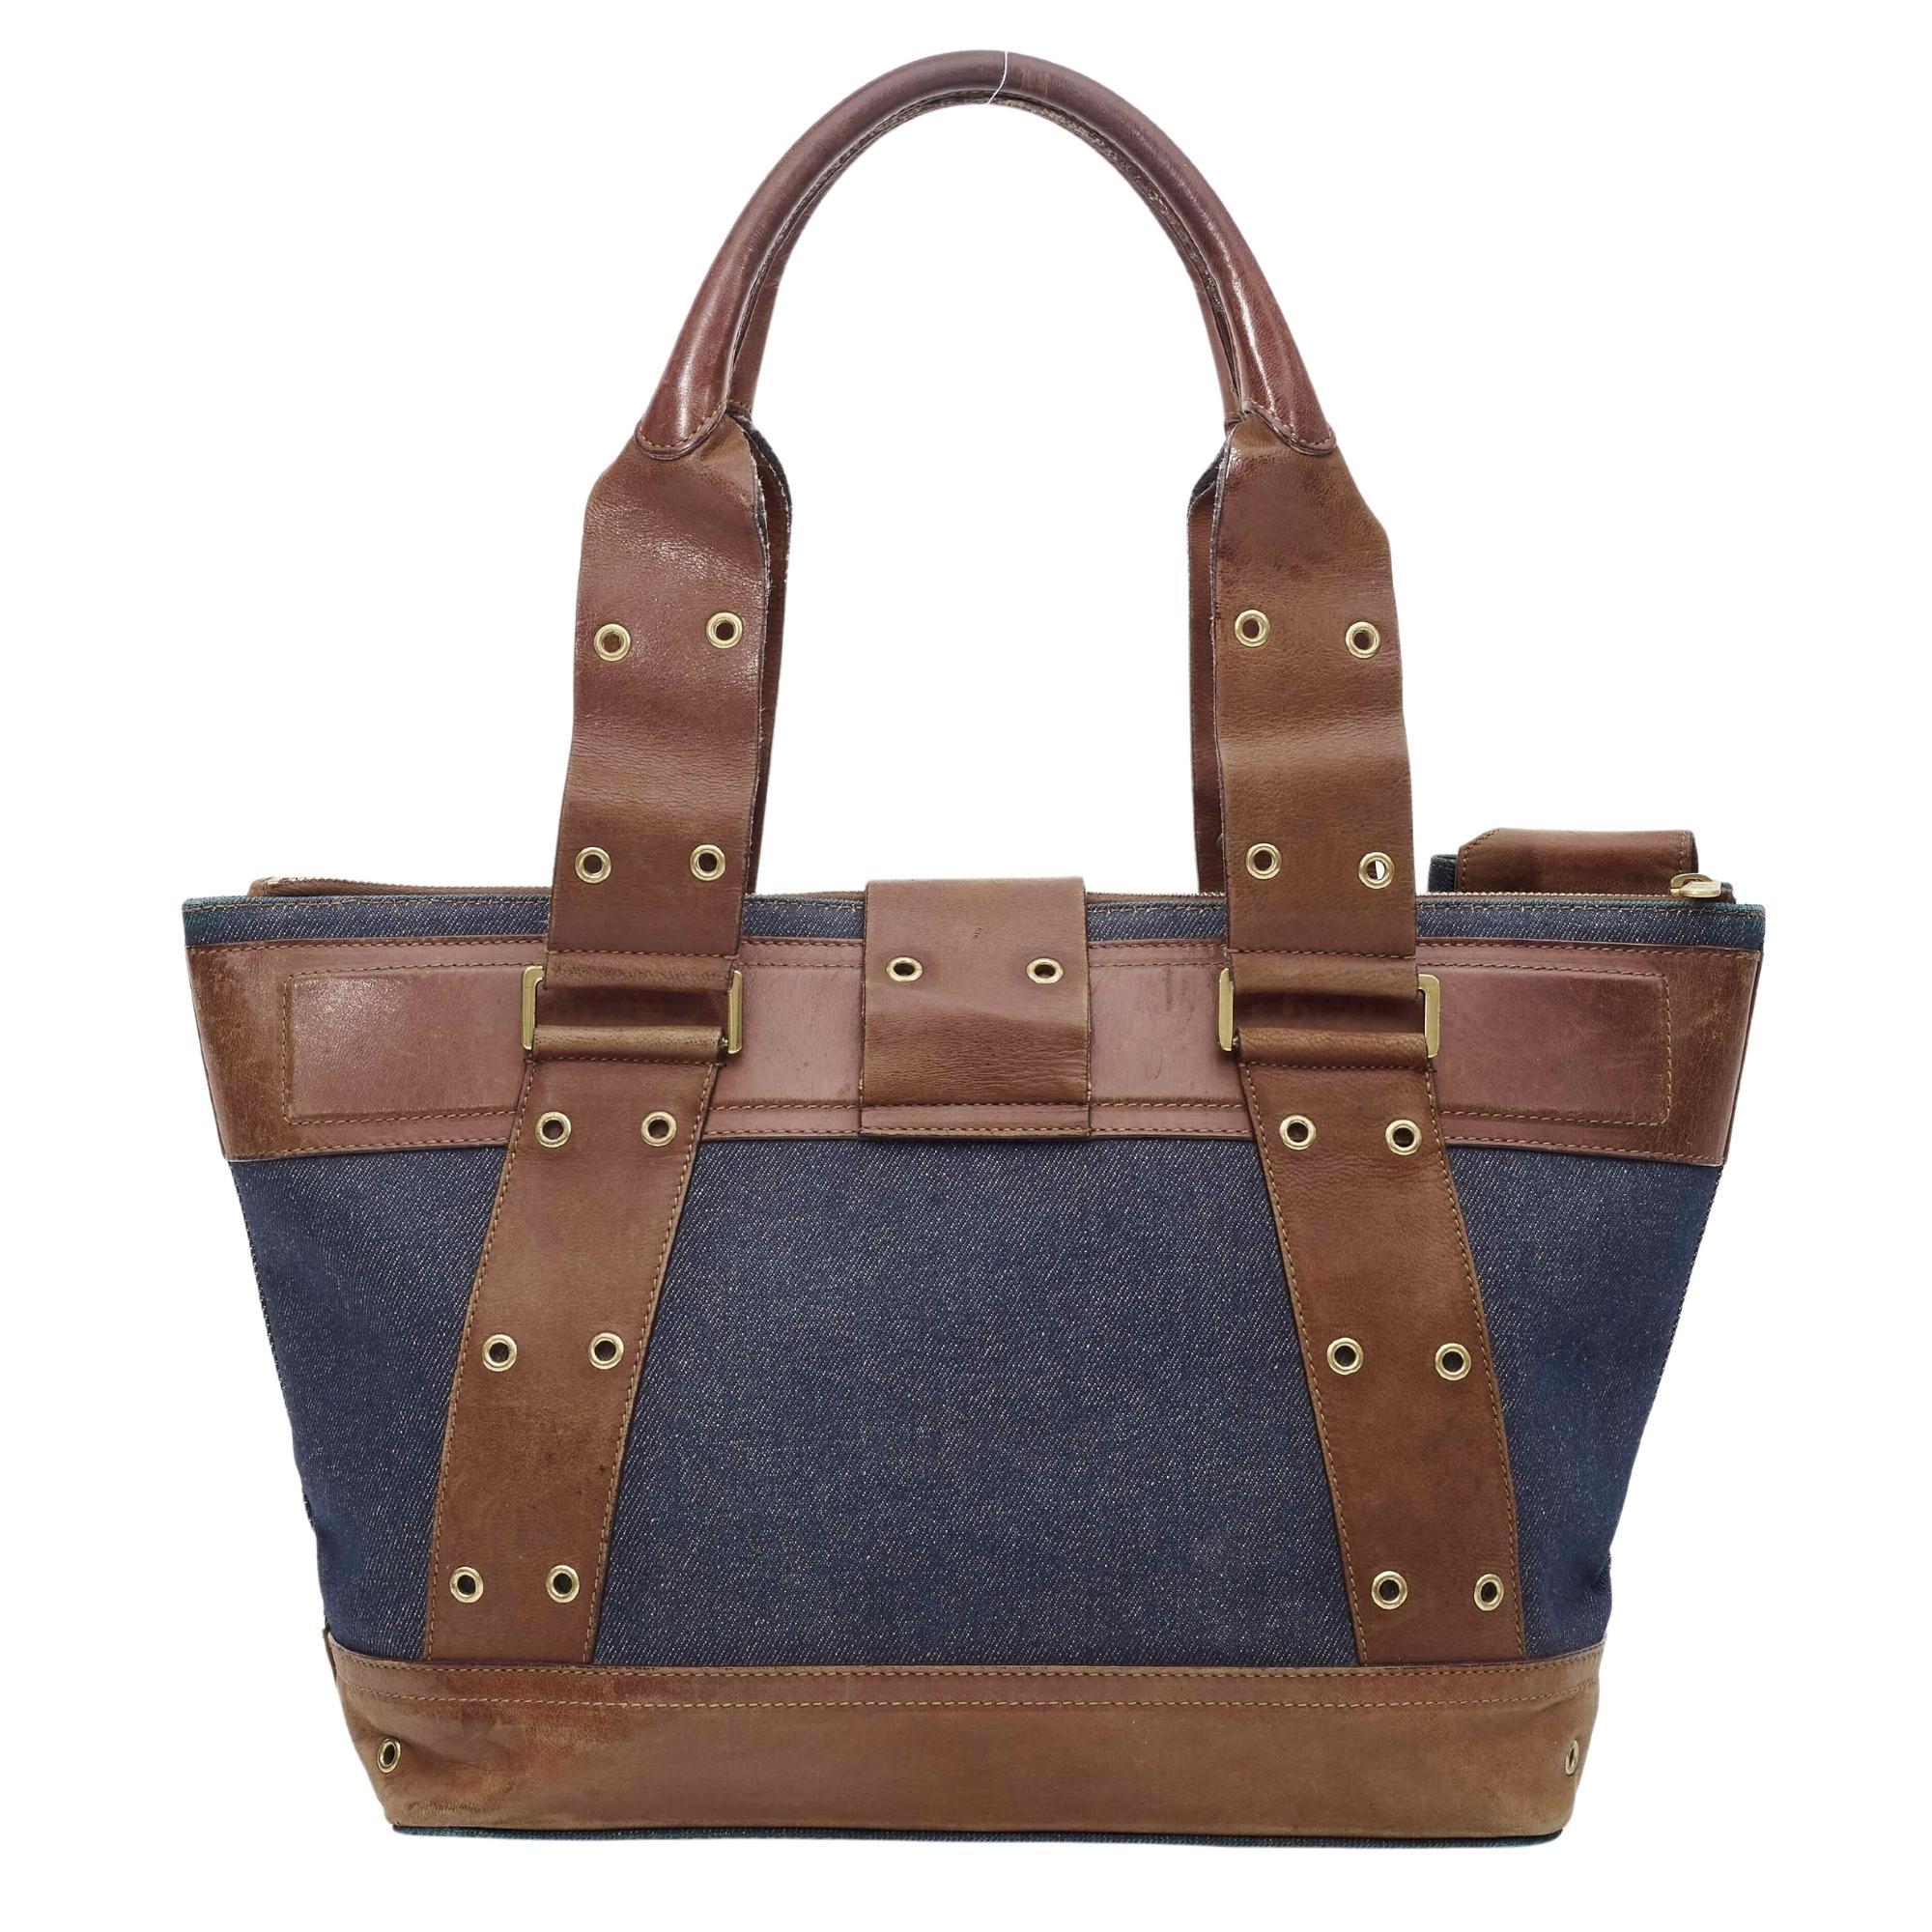 This shoulder bag is made of fine blue aged denim and features brown leather trim, dual rolled top handles, brass hardware and a a crossover strap with a button. The top zipper opened to a brown Dior logo fabric interior with a zipper pocket.